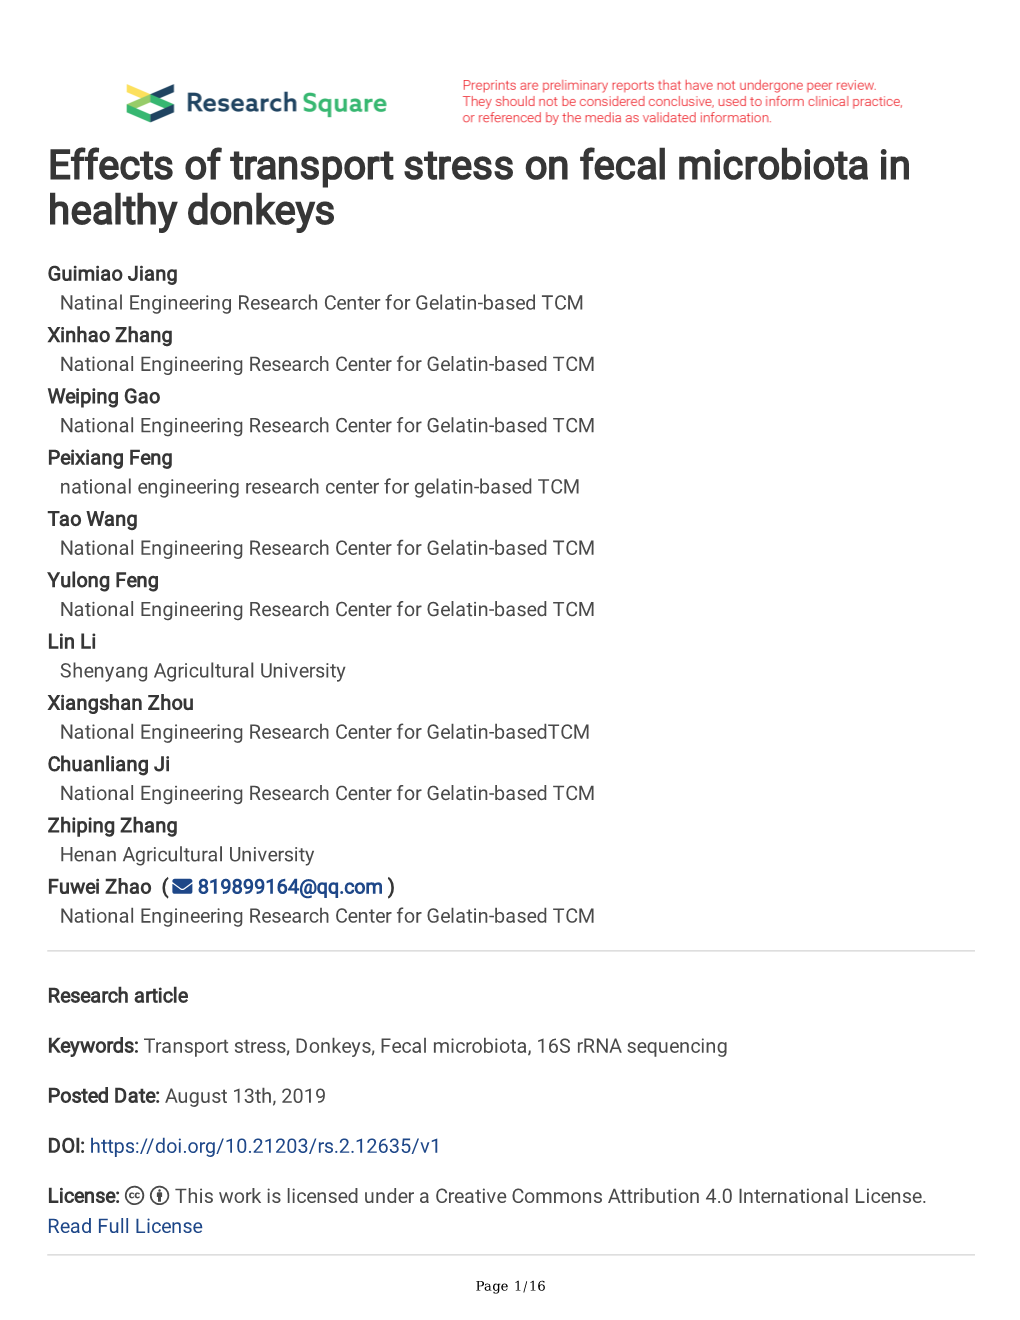 Effects of Transport Stress on Fecal Microbiota in Healthy Donkeys